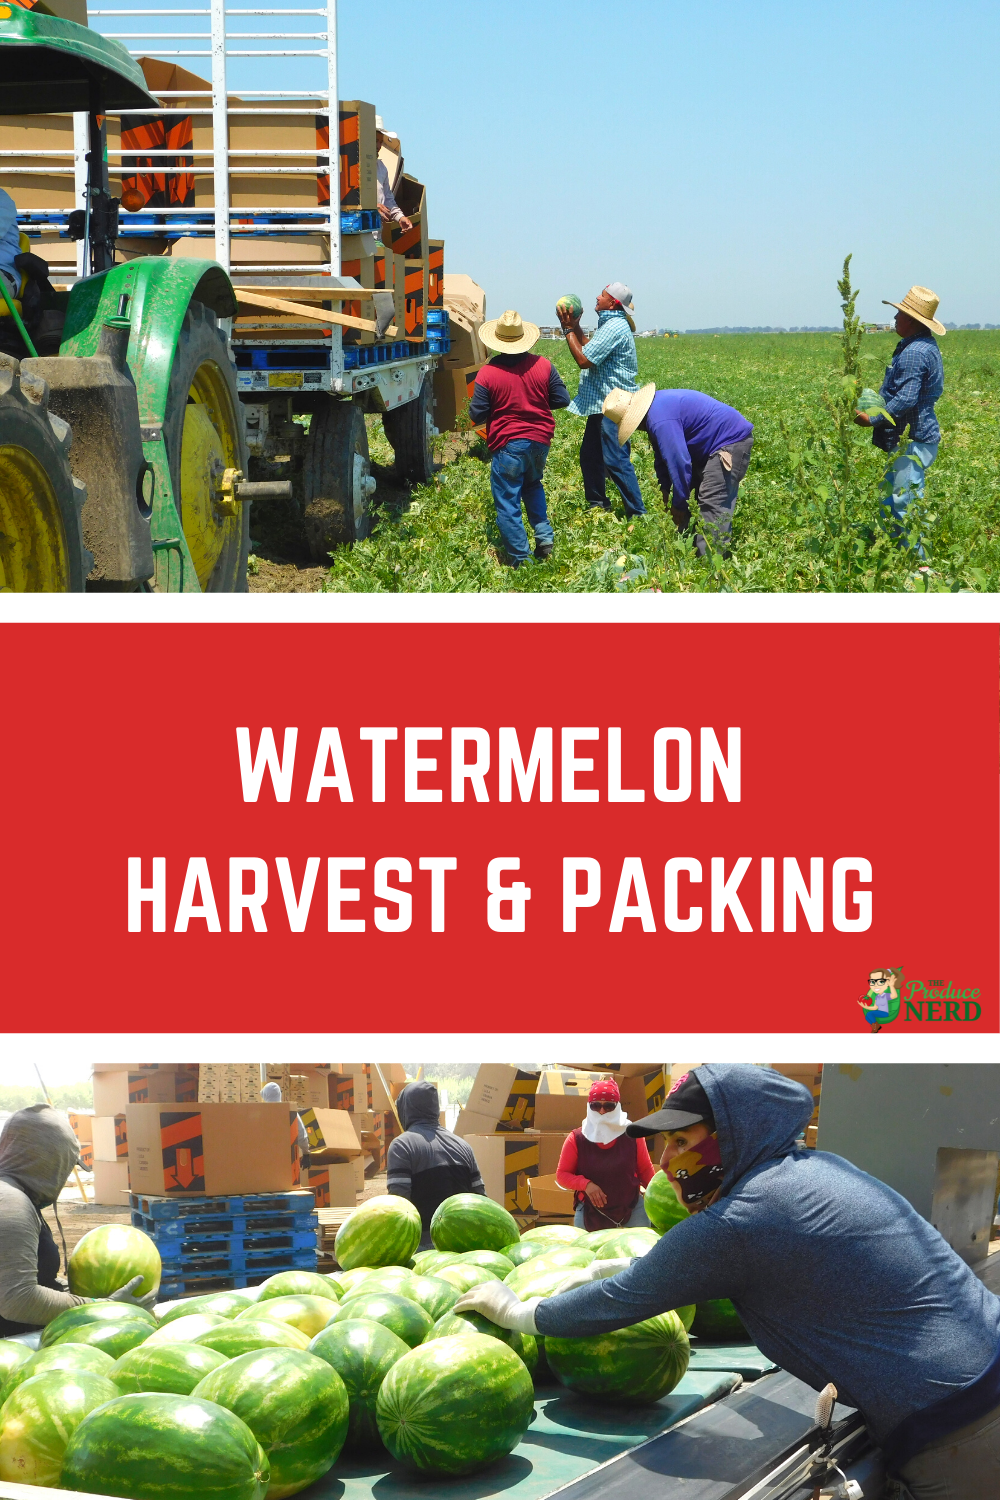 You are currently viewing Watermelon Harvest & Packing in California